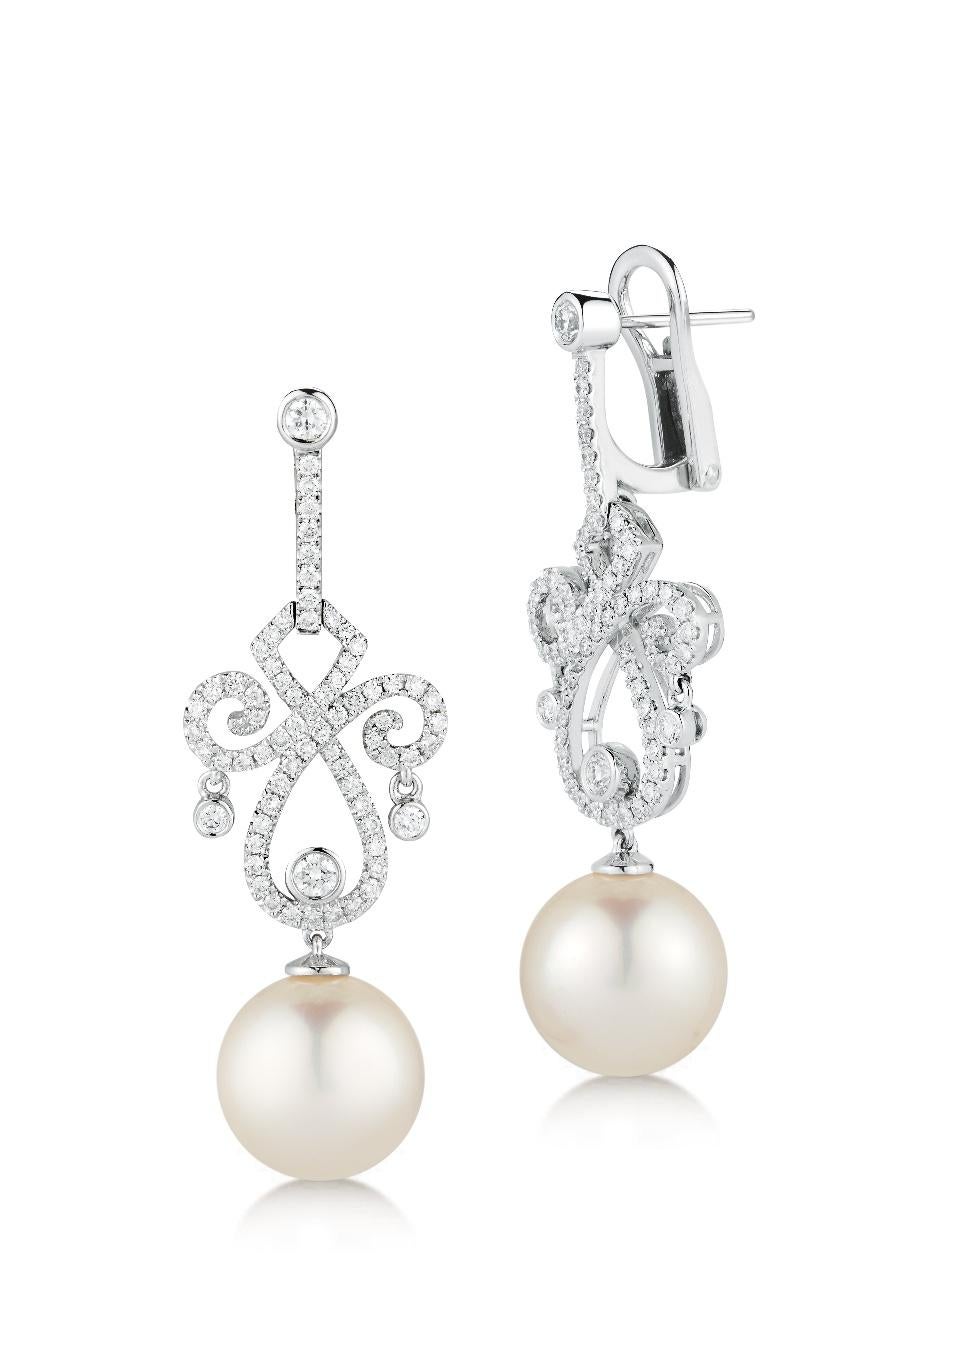 13mm Round White South Sea pearls dangling gracefully from a diamond swirl frame of 18-karat white gold, studded with white diamond pavé.

-18K White gold 
-1.34 Total Carat Weight
-13mm White South Sea Pearls
-Post and clip
-Made in USA
